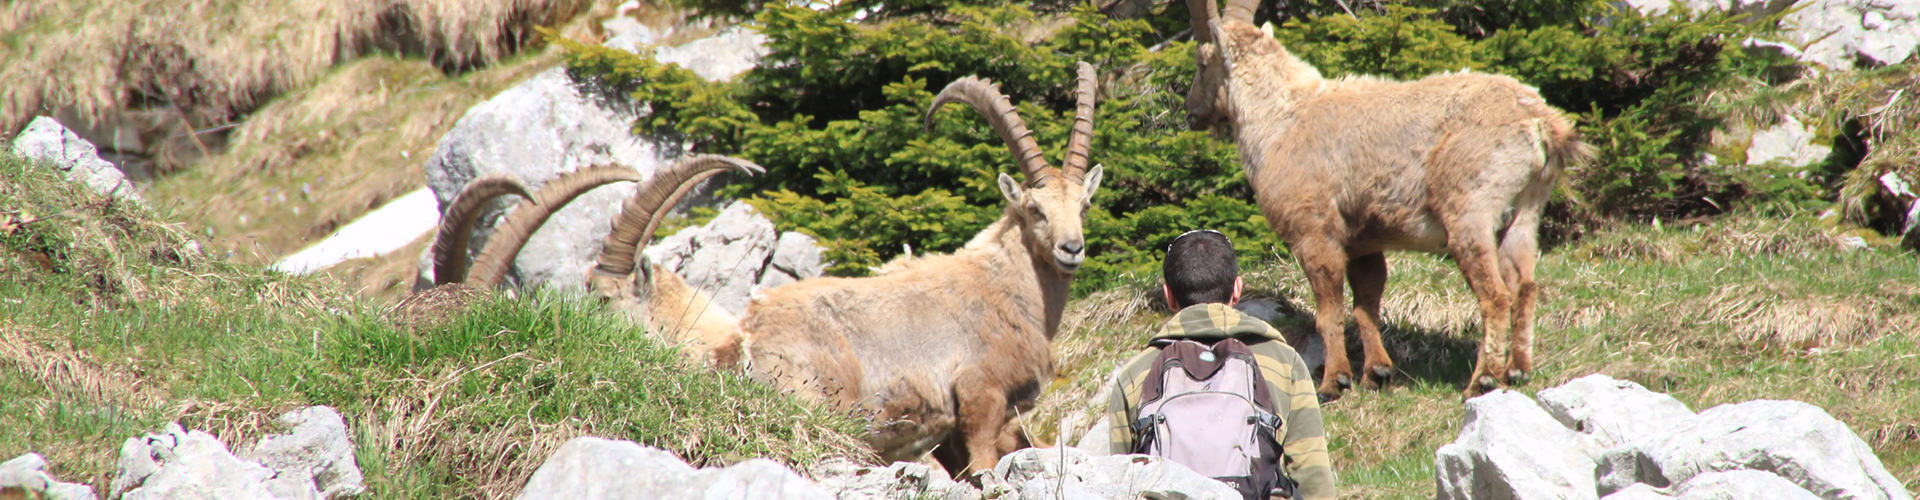  Ibex rarely flee when approached by hikers, leading to a common misinterpretation that the animals are undisturbed or even that it is possible to get closer than they can actually tolerate. Photo by Céline Martin